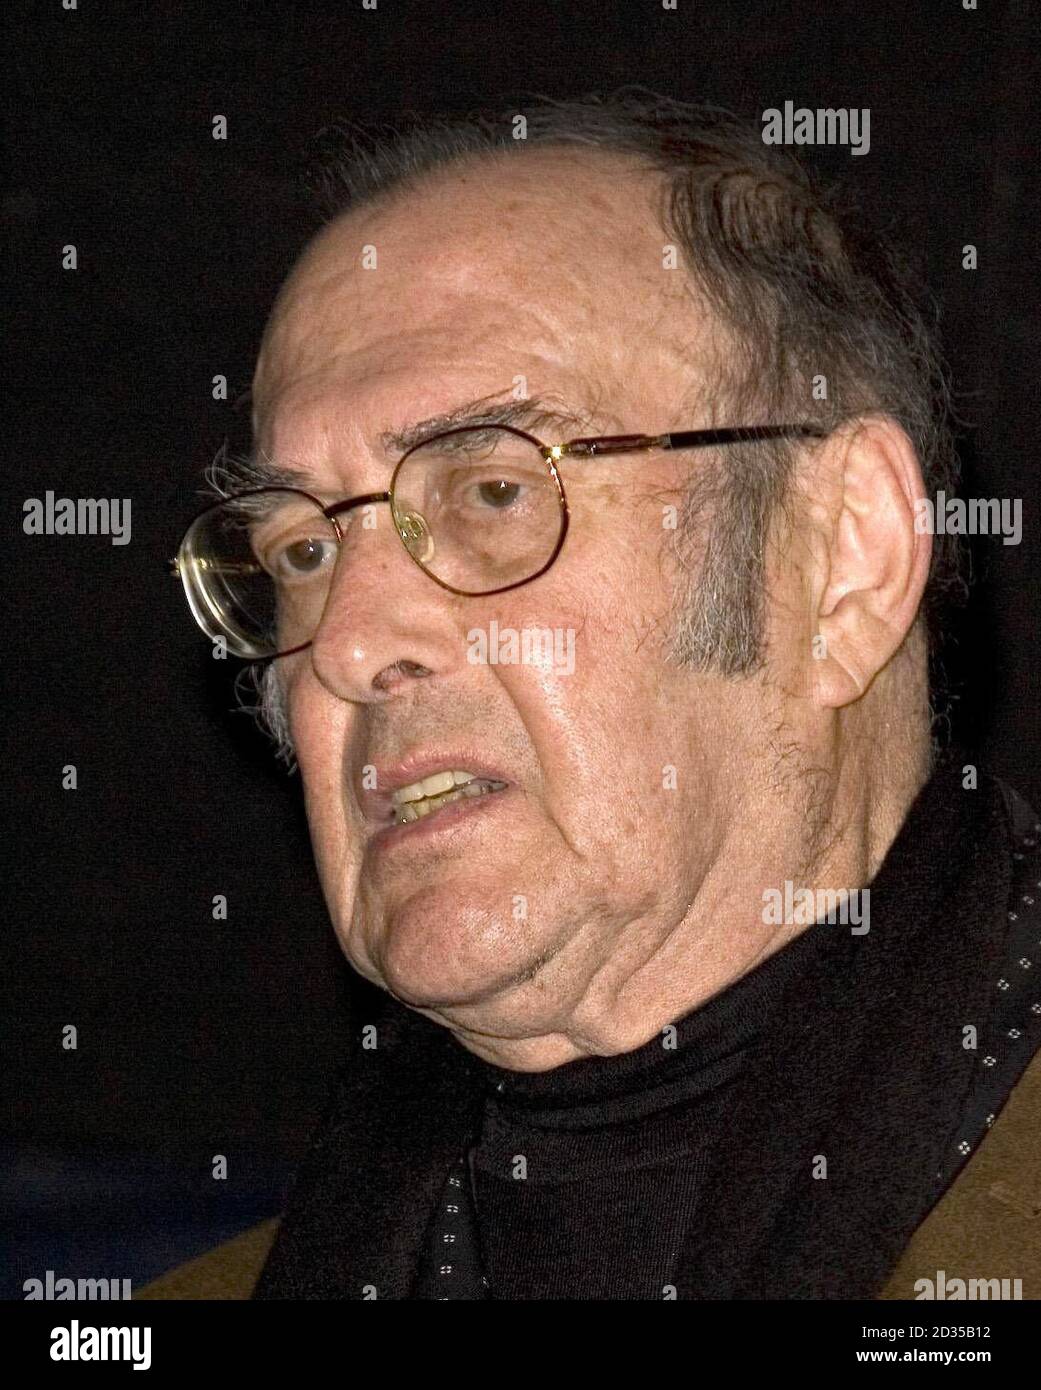 Harold Pinter speaks during the Belarus Free Theatre Company production of 'Being Harold Pinter' at the Soho Theatre in central London. Stock Photo